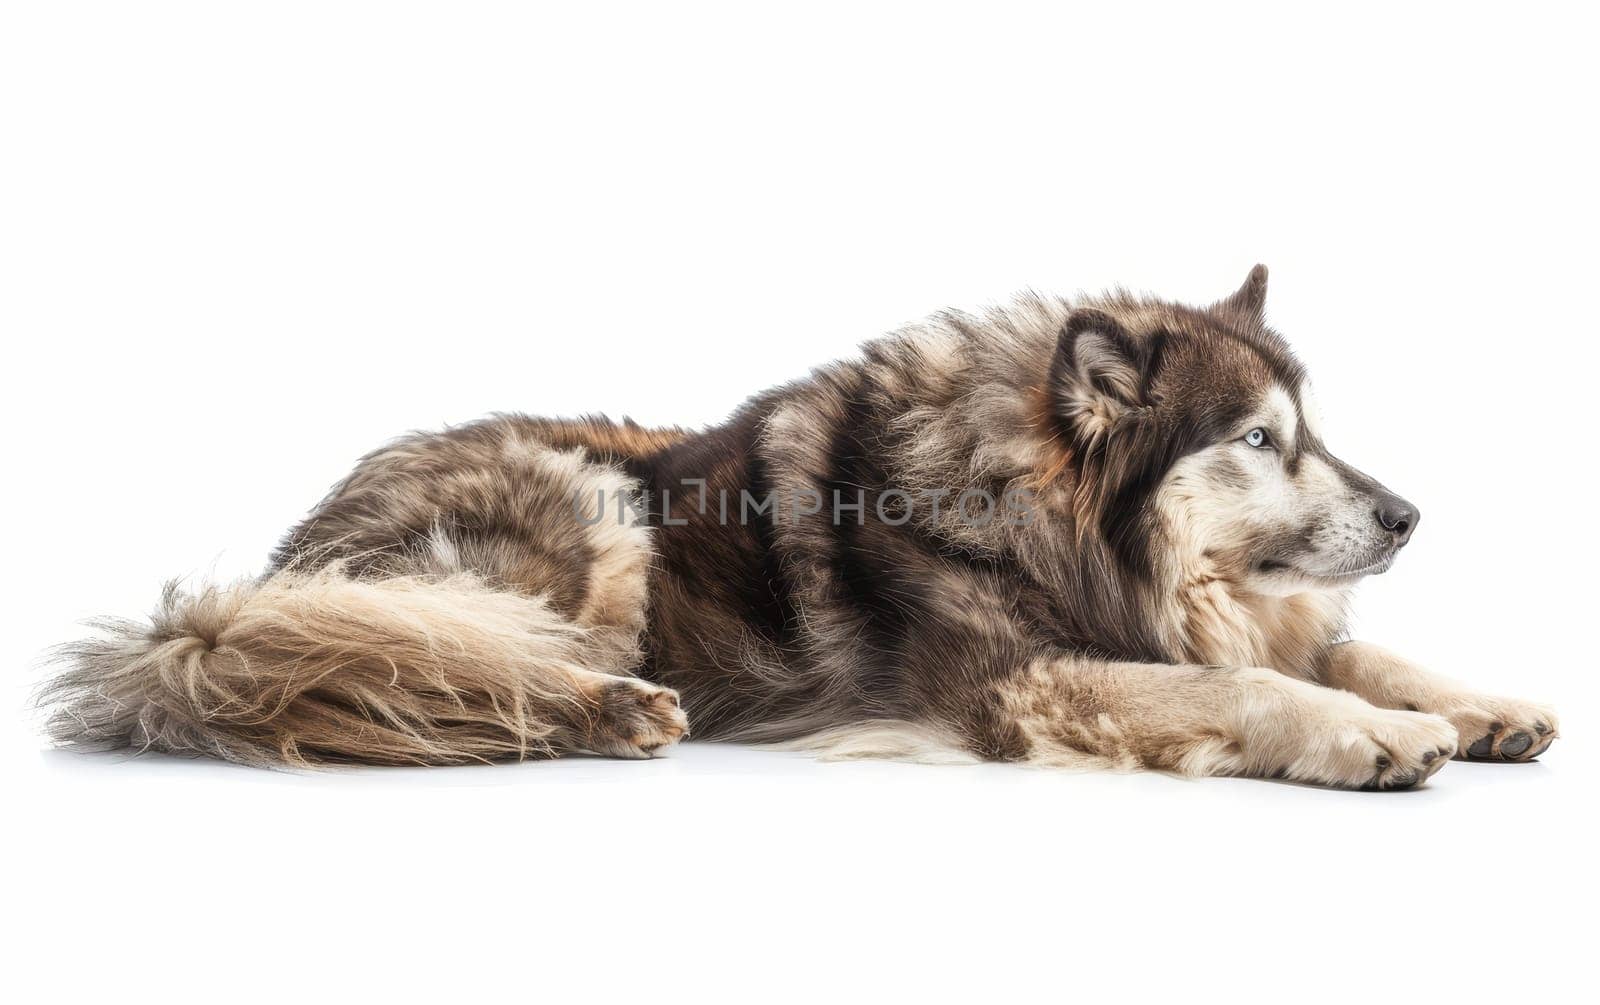 A serene Alaskan Malamute sleeps soundly, its luxurious coat and calm repose showcasing the breed's gentle and composed nature. The dog's peaceful slumber invites a sense of tranquility. by sfinks